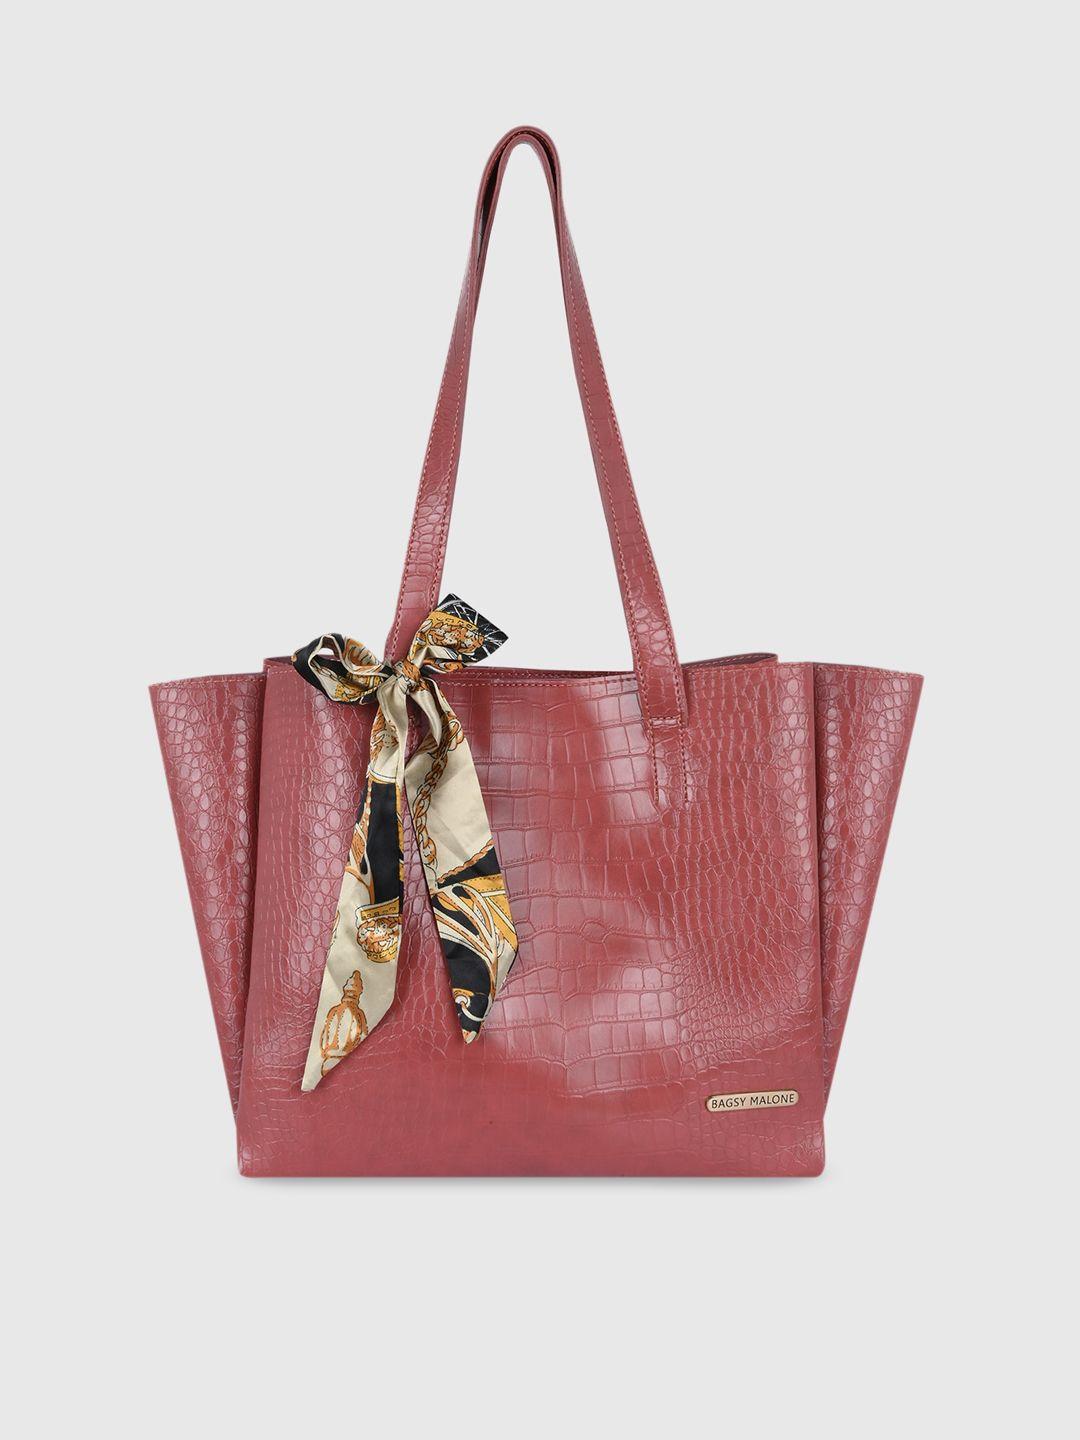 bagsy malone animal textured pu structured tote bag with bow detail